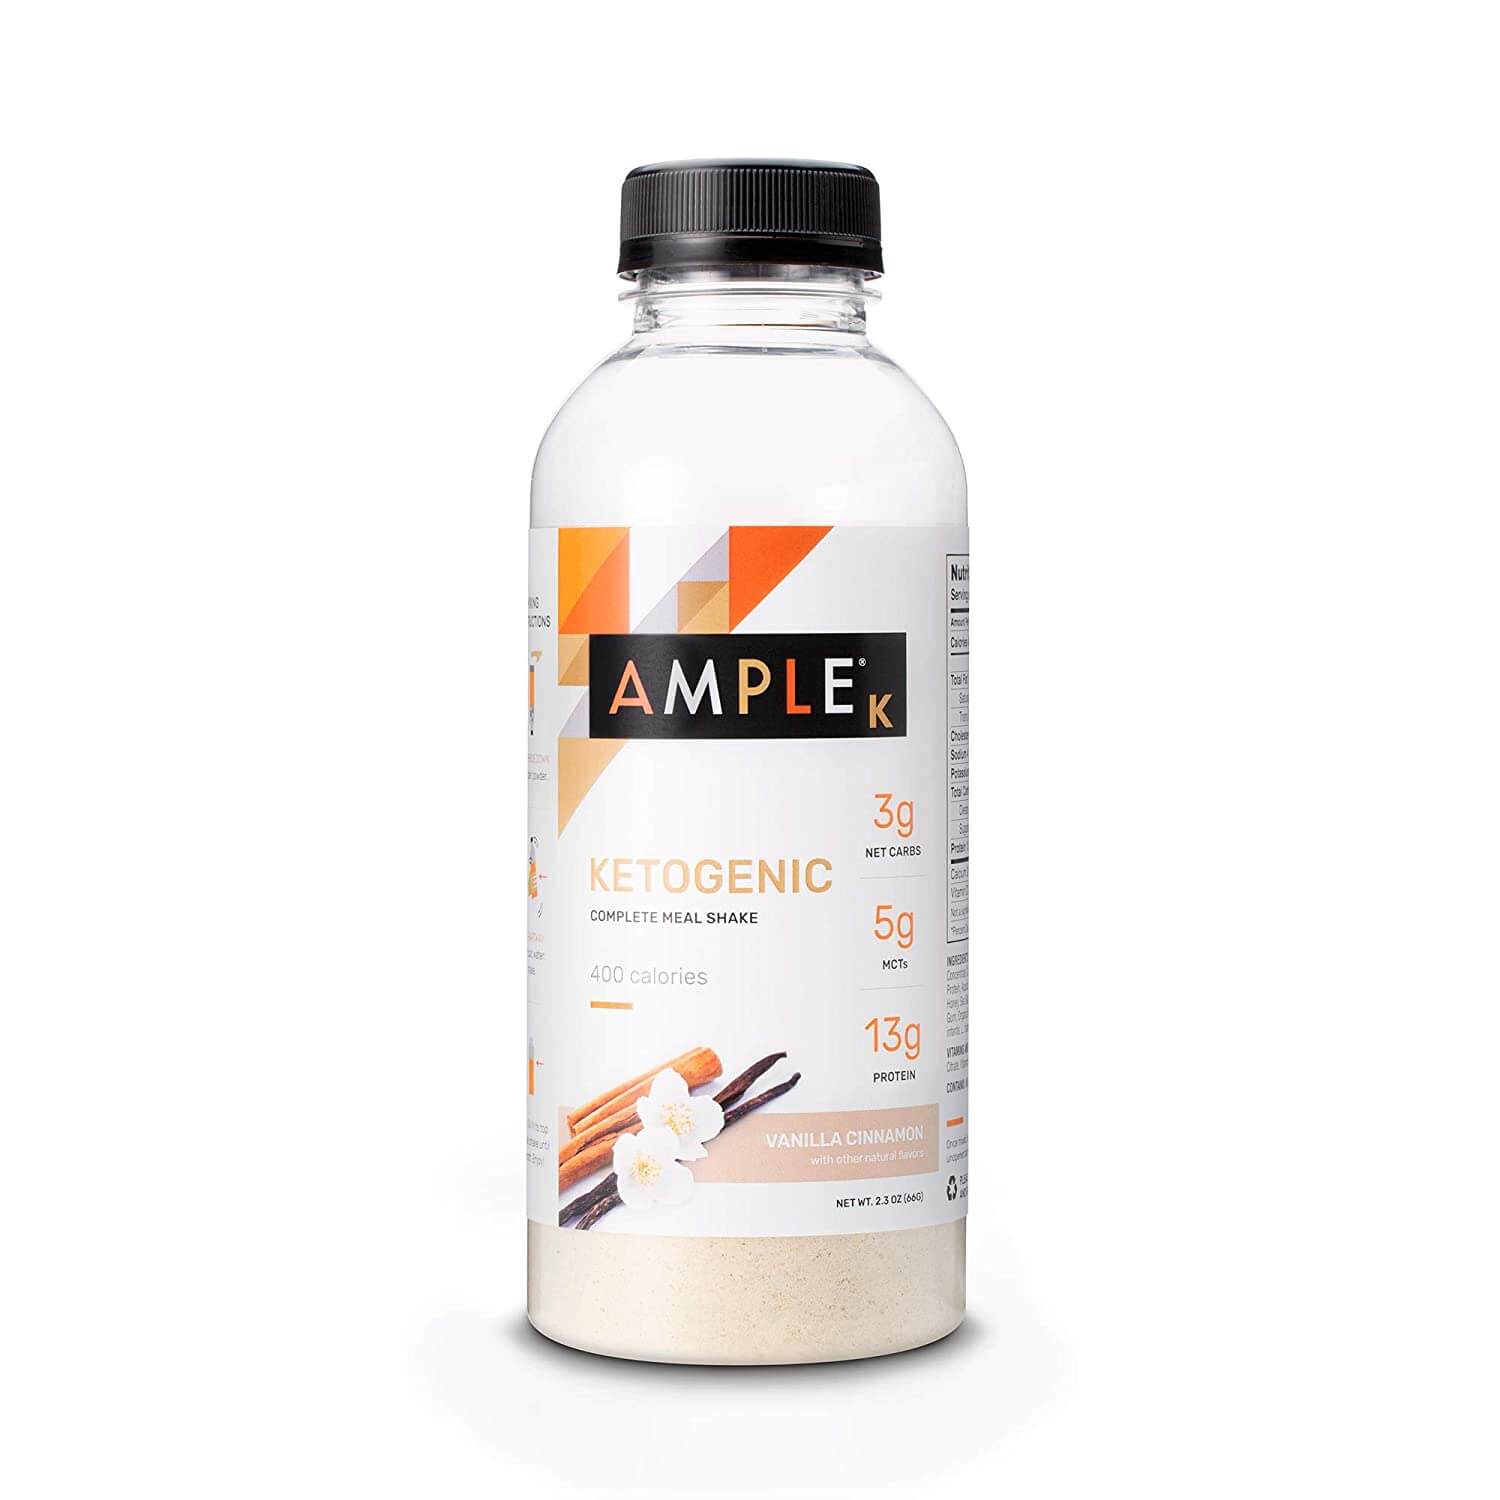 Ample K Ketogenic Meal Replacement Review